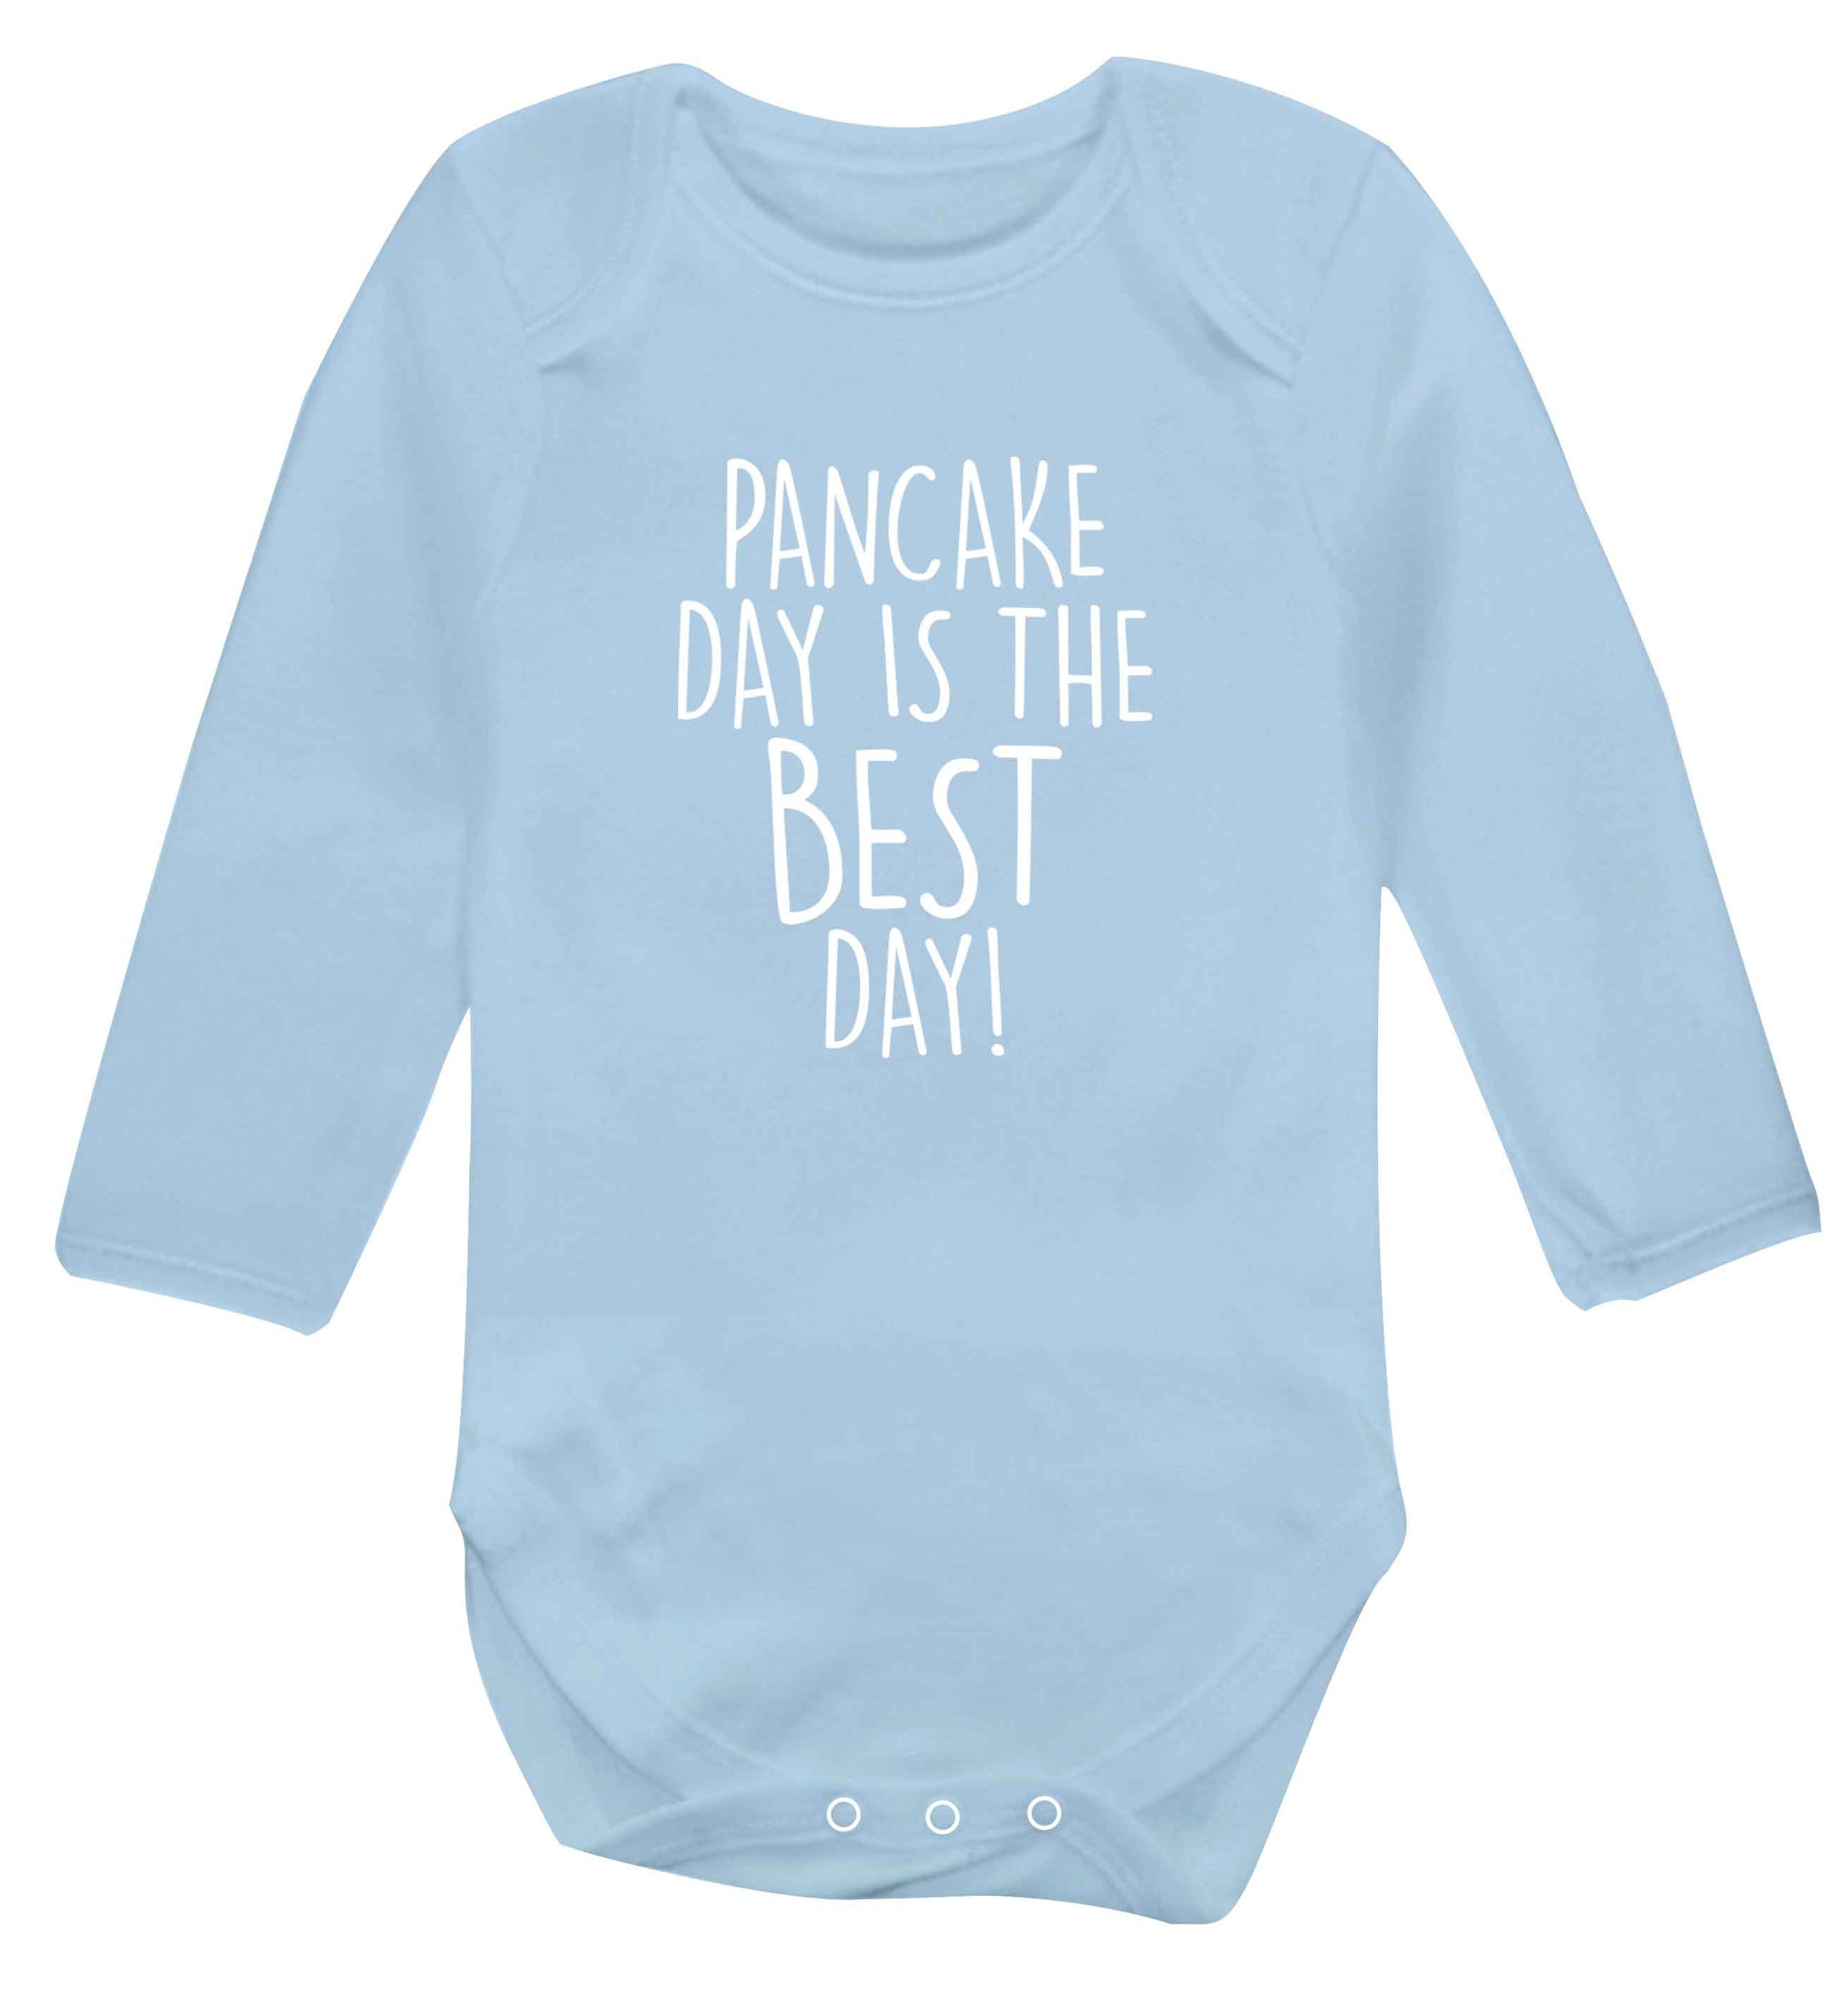 Pancake day is the best day baby vest long sleeved pale blue 6-12 months